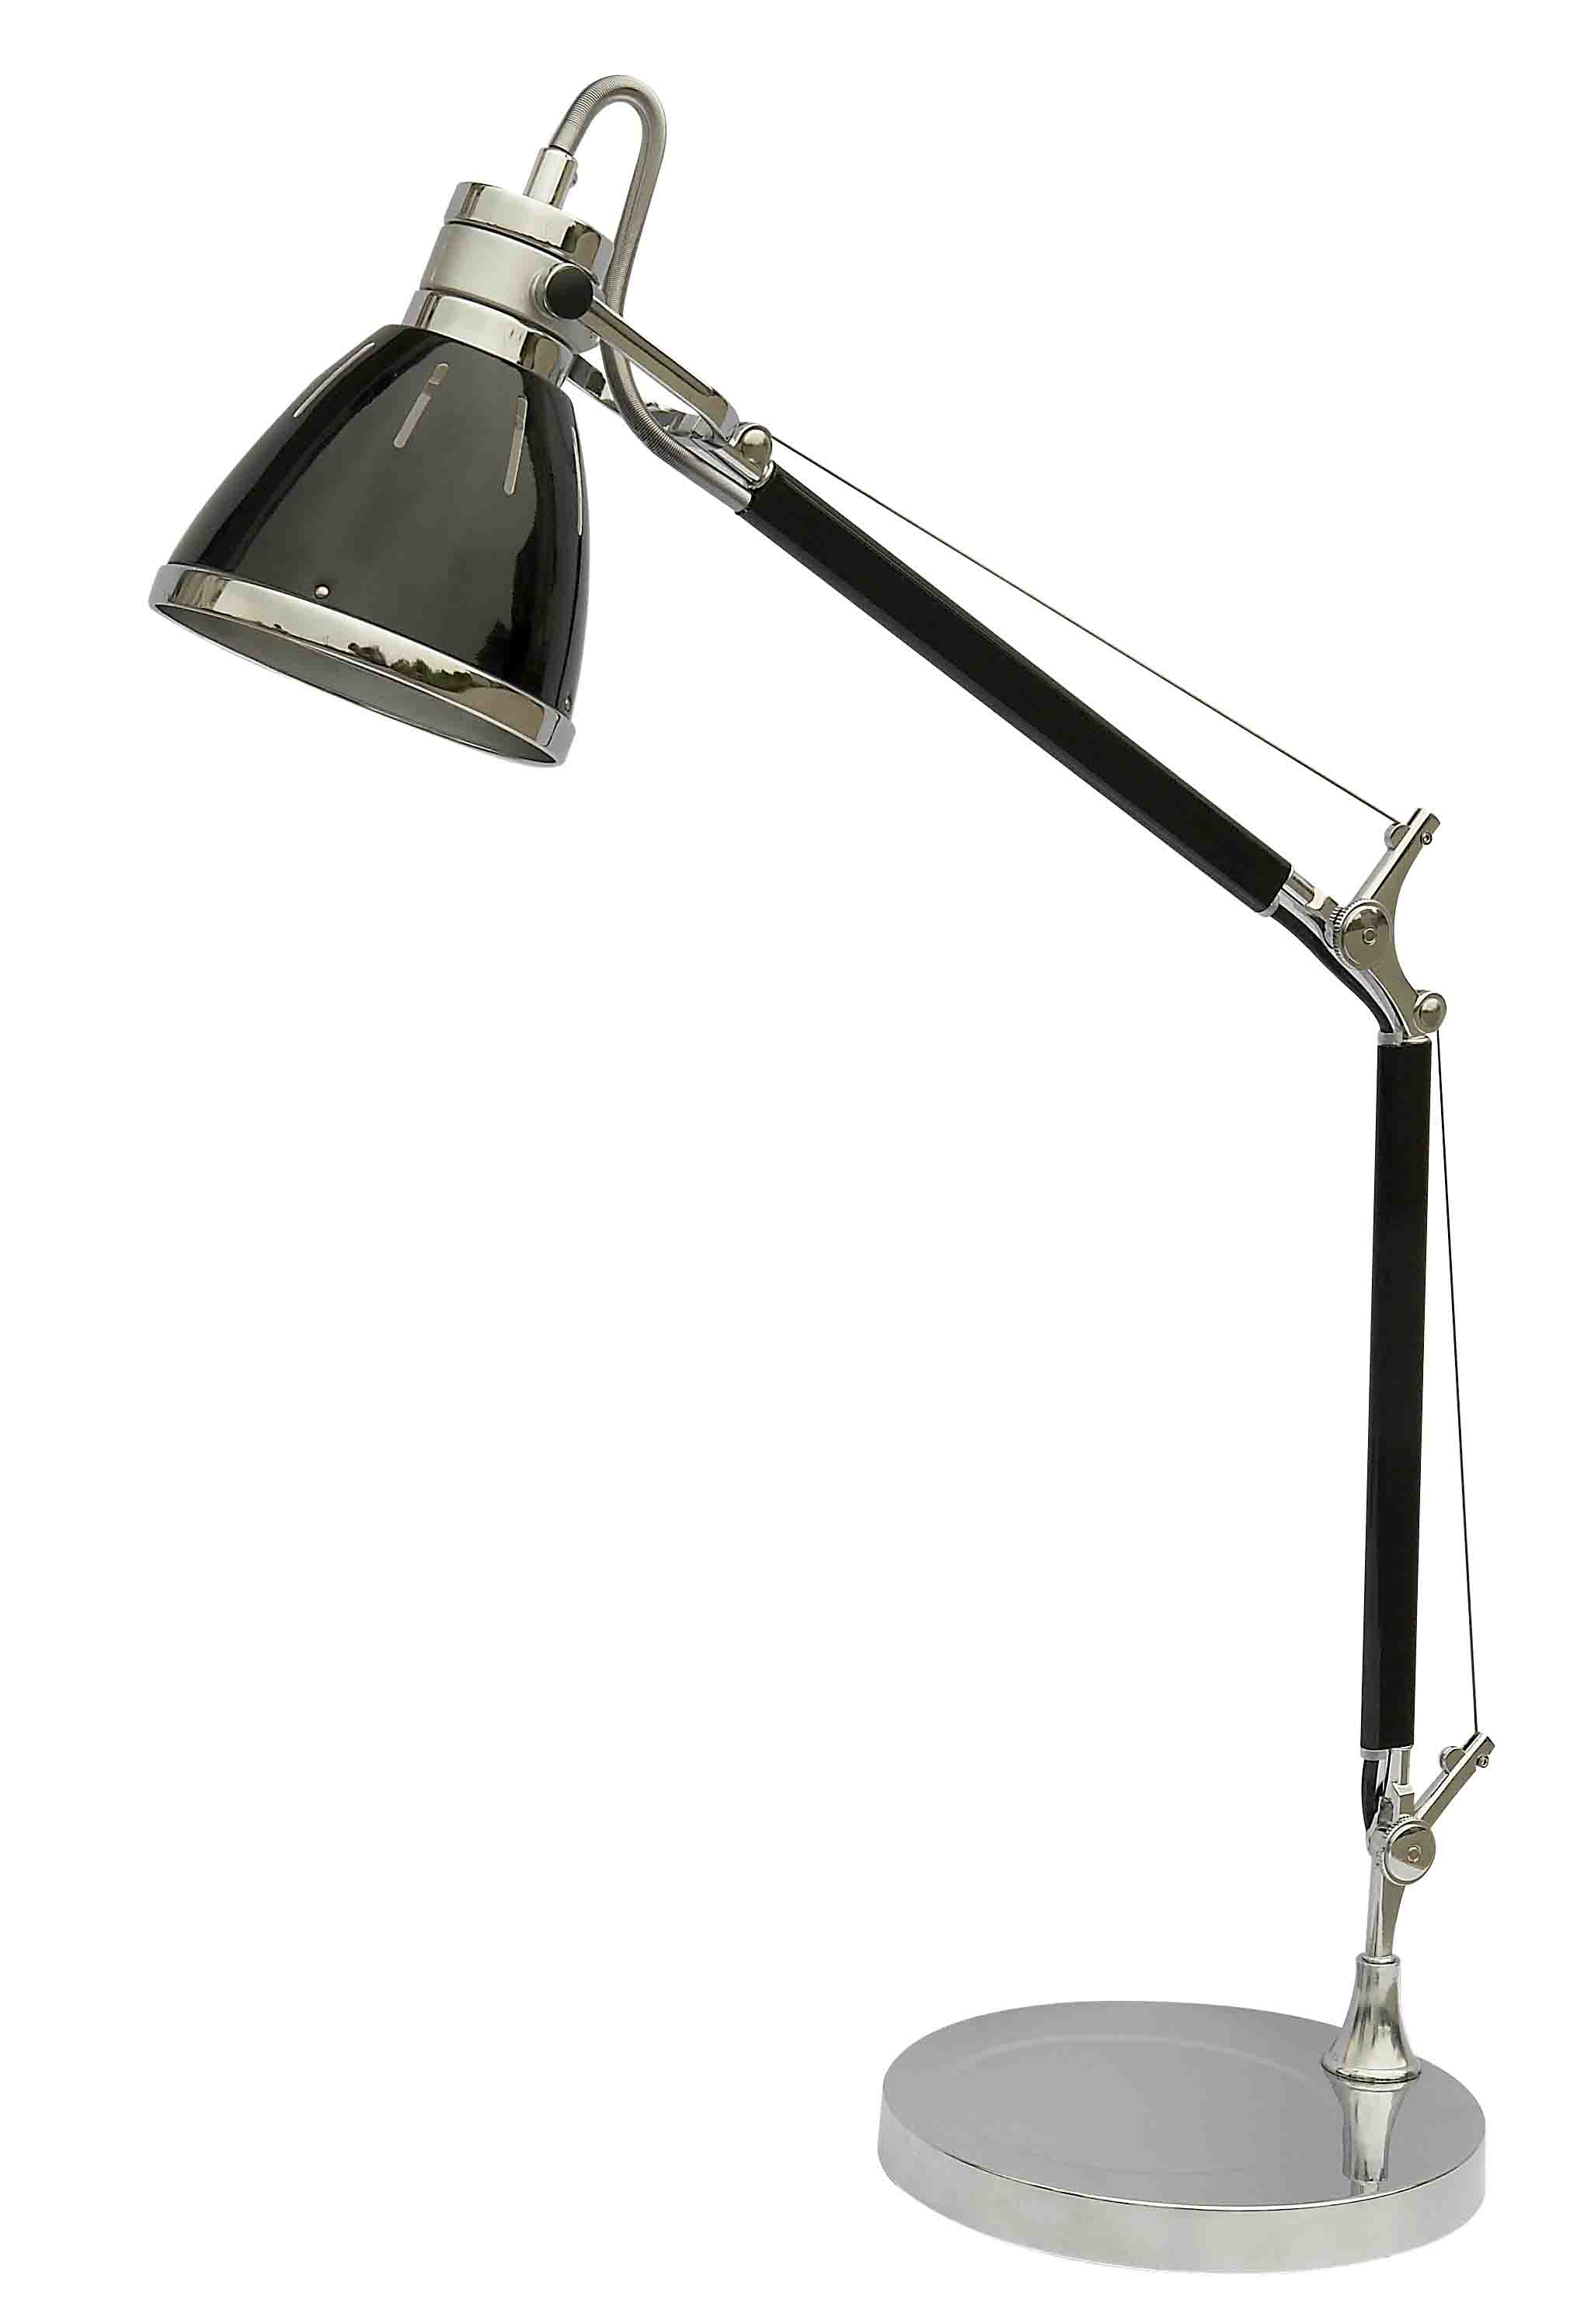 New Desk Lamp for Home Decoration